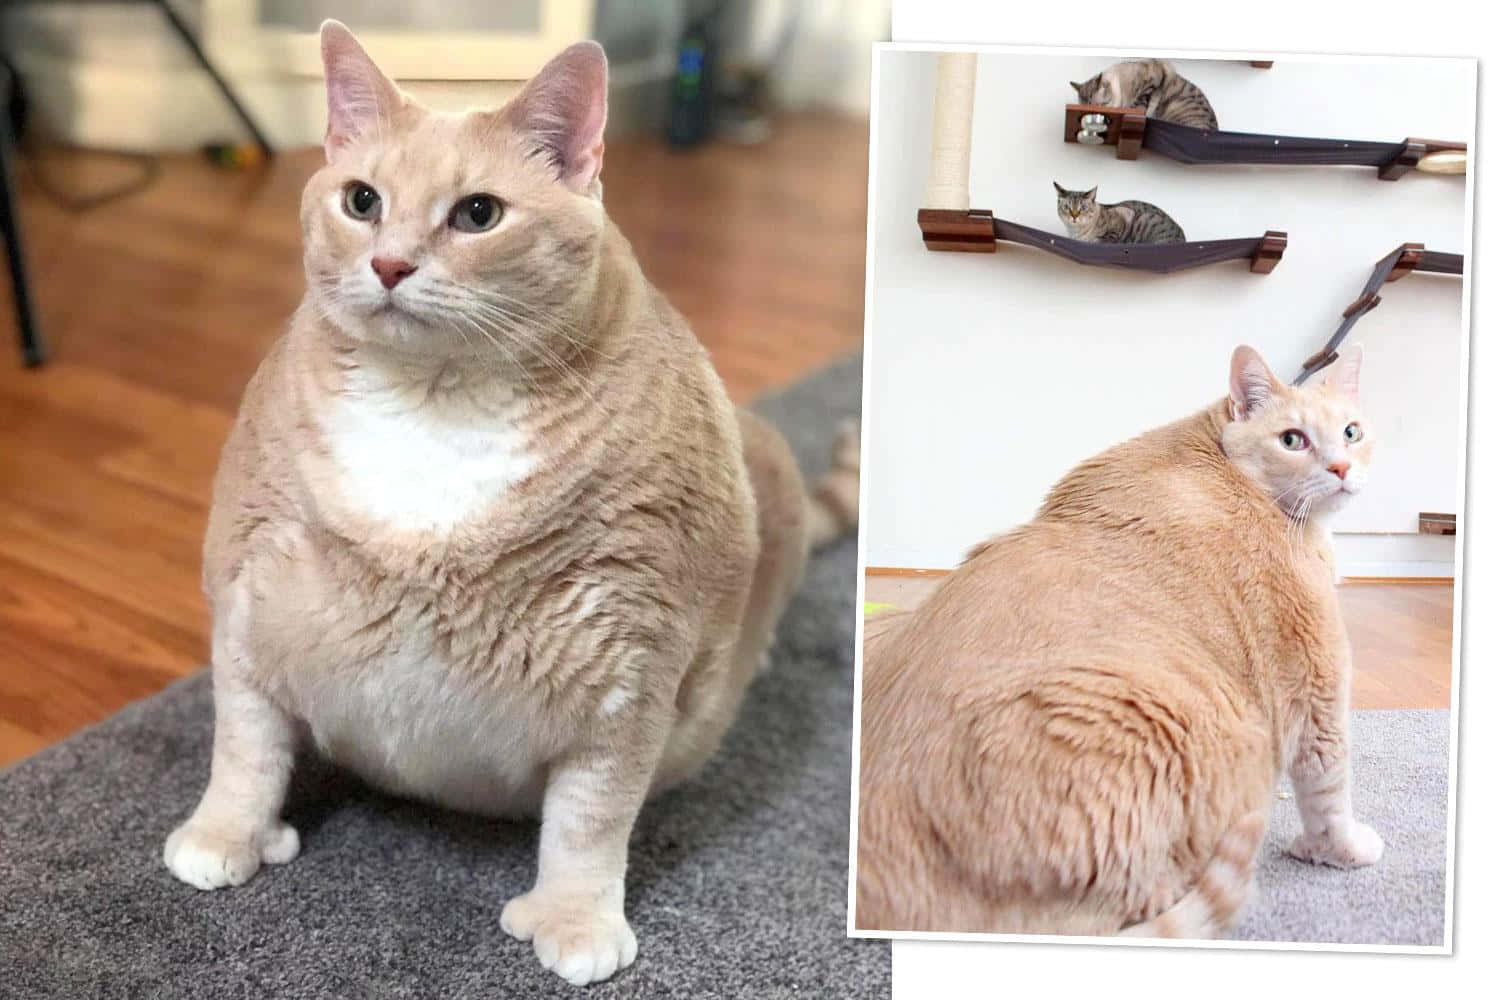 His Majesty, the Chubby Cat